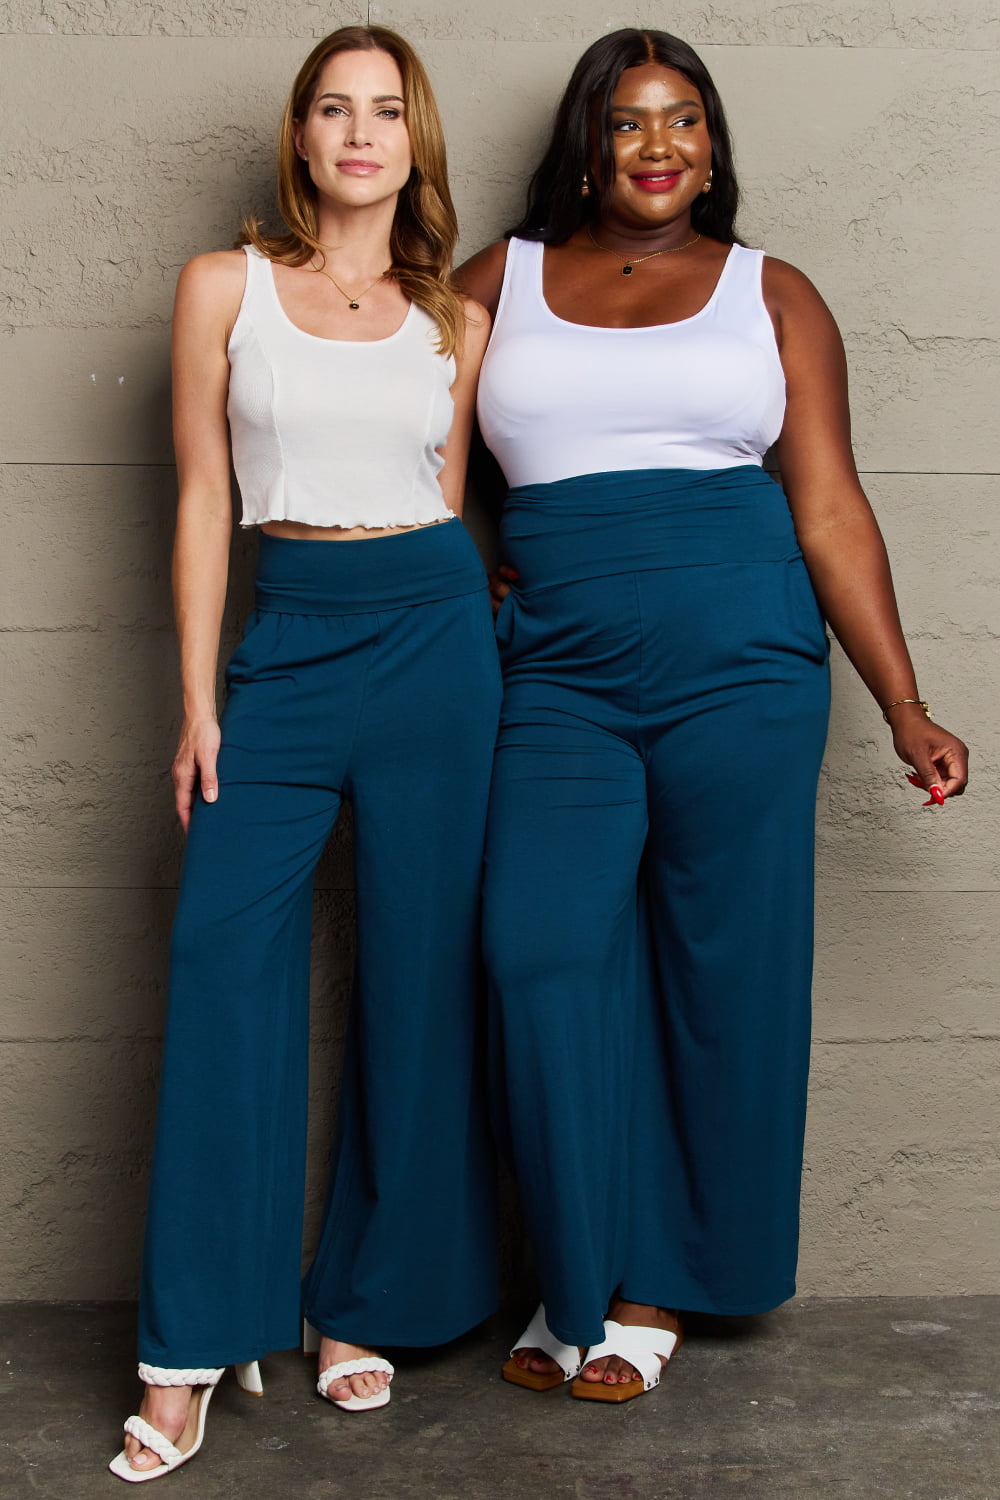 My Best Wish Full Size High Waisted Palazzo Pants - Teal / S - Bottoms - Pants - 1 - 2024